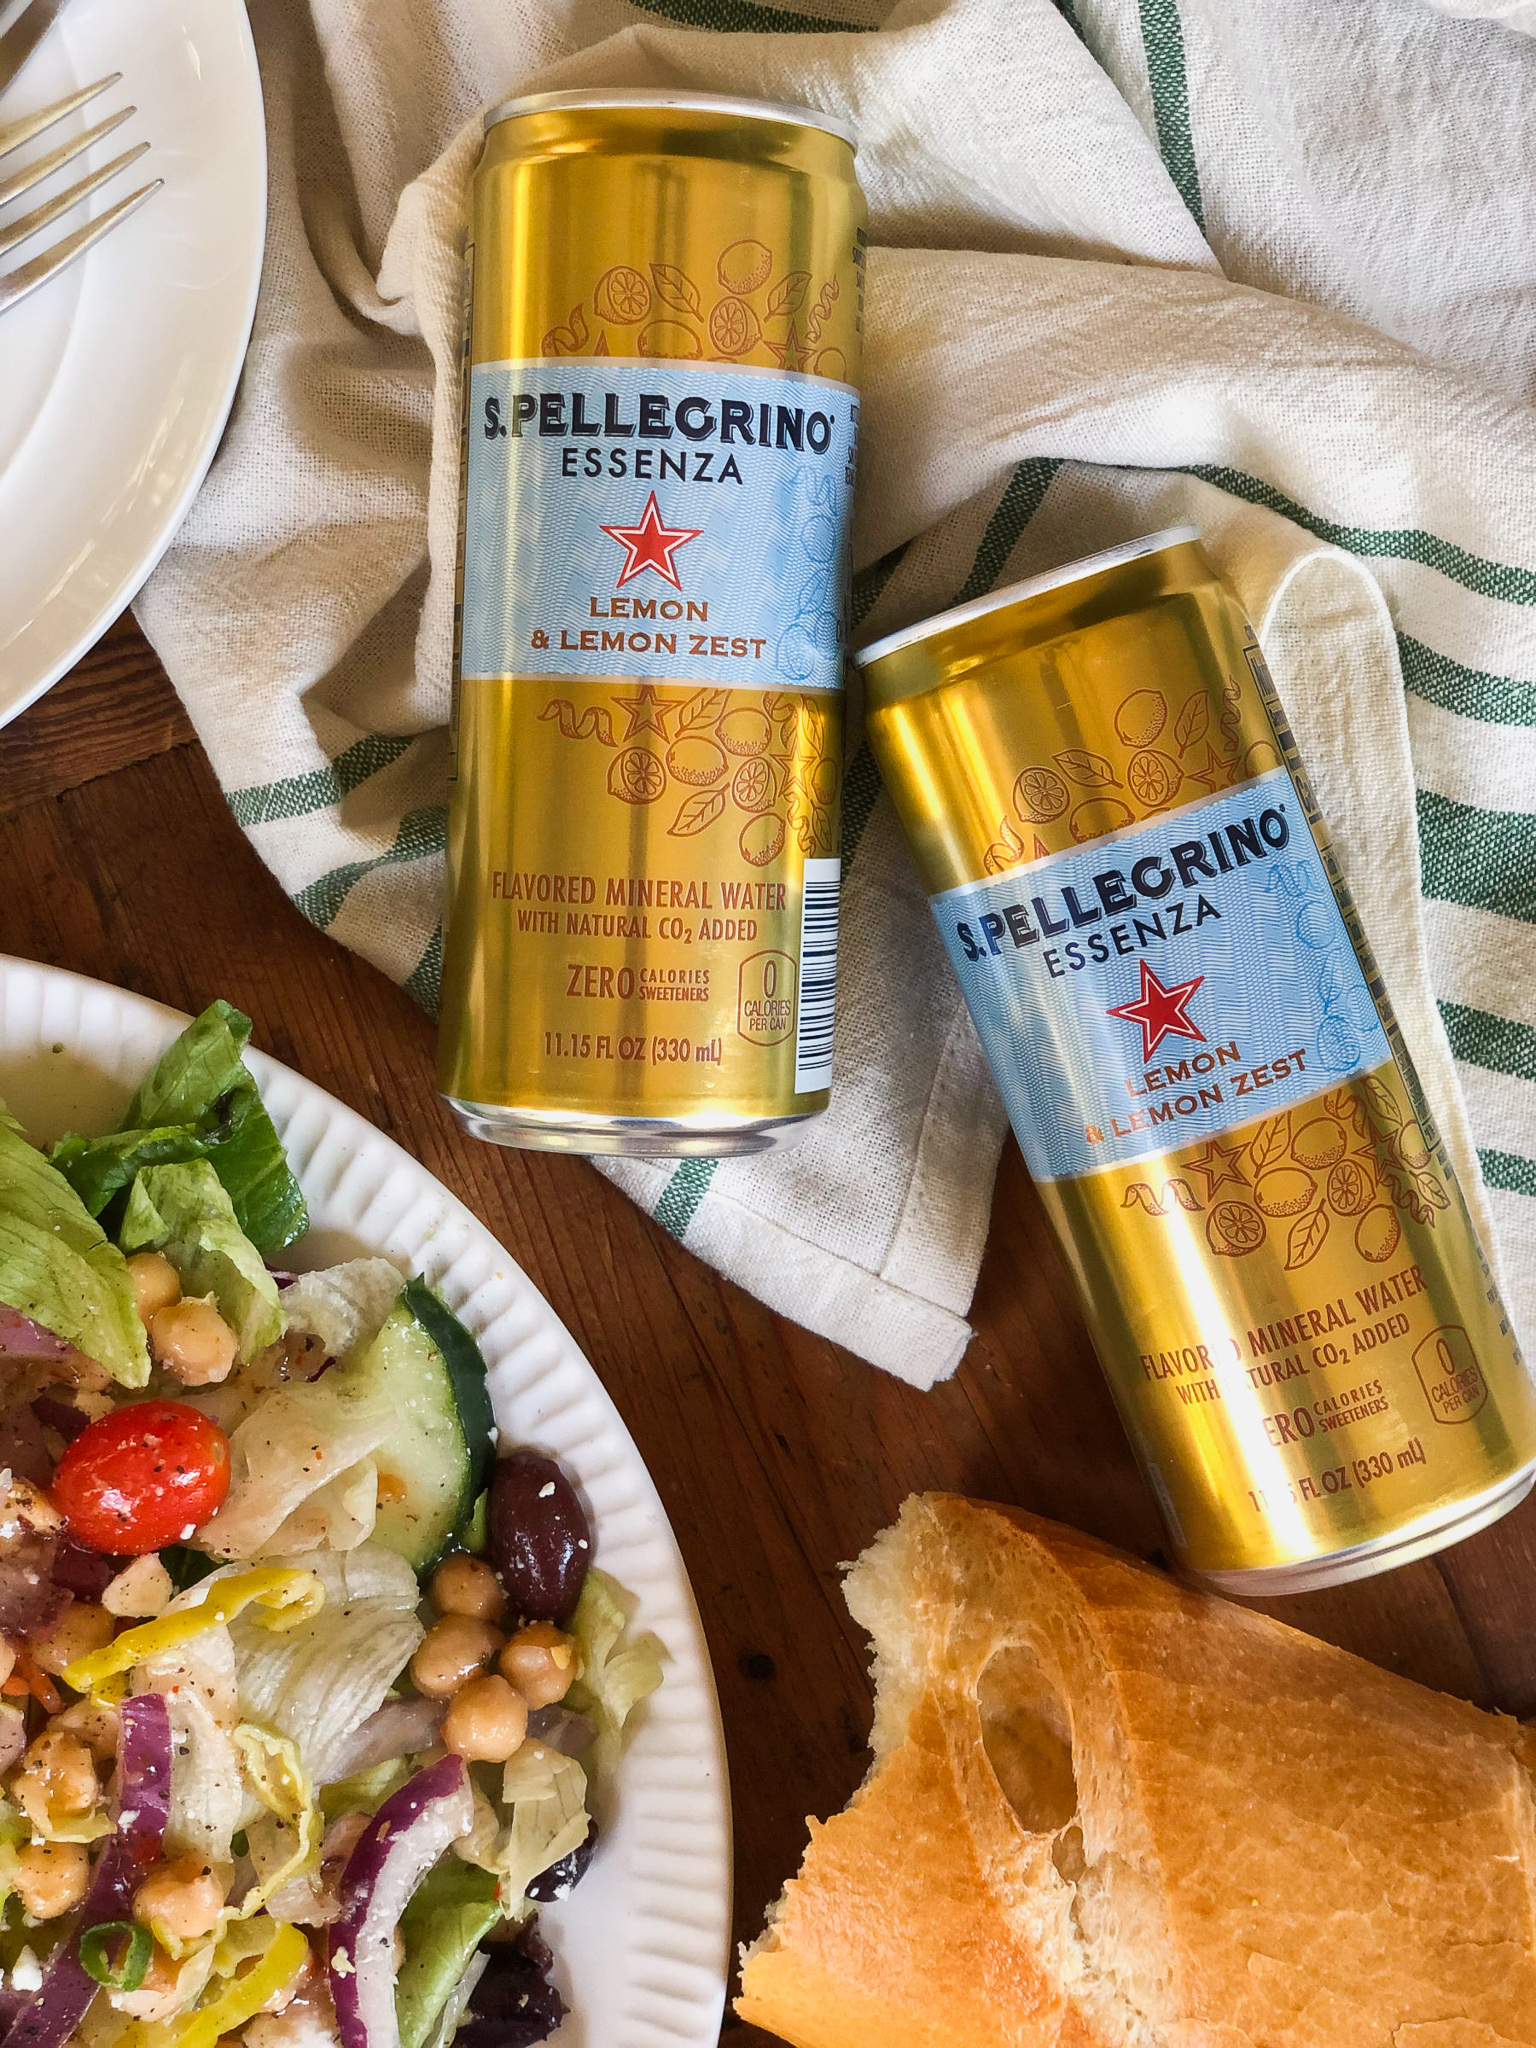 Add A Twist Of Flavor To Any Occasion With S.Pellegrino Essenza on I Heart Publix 2